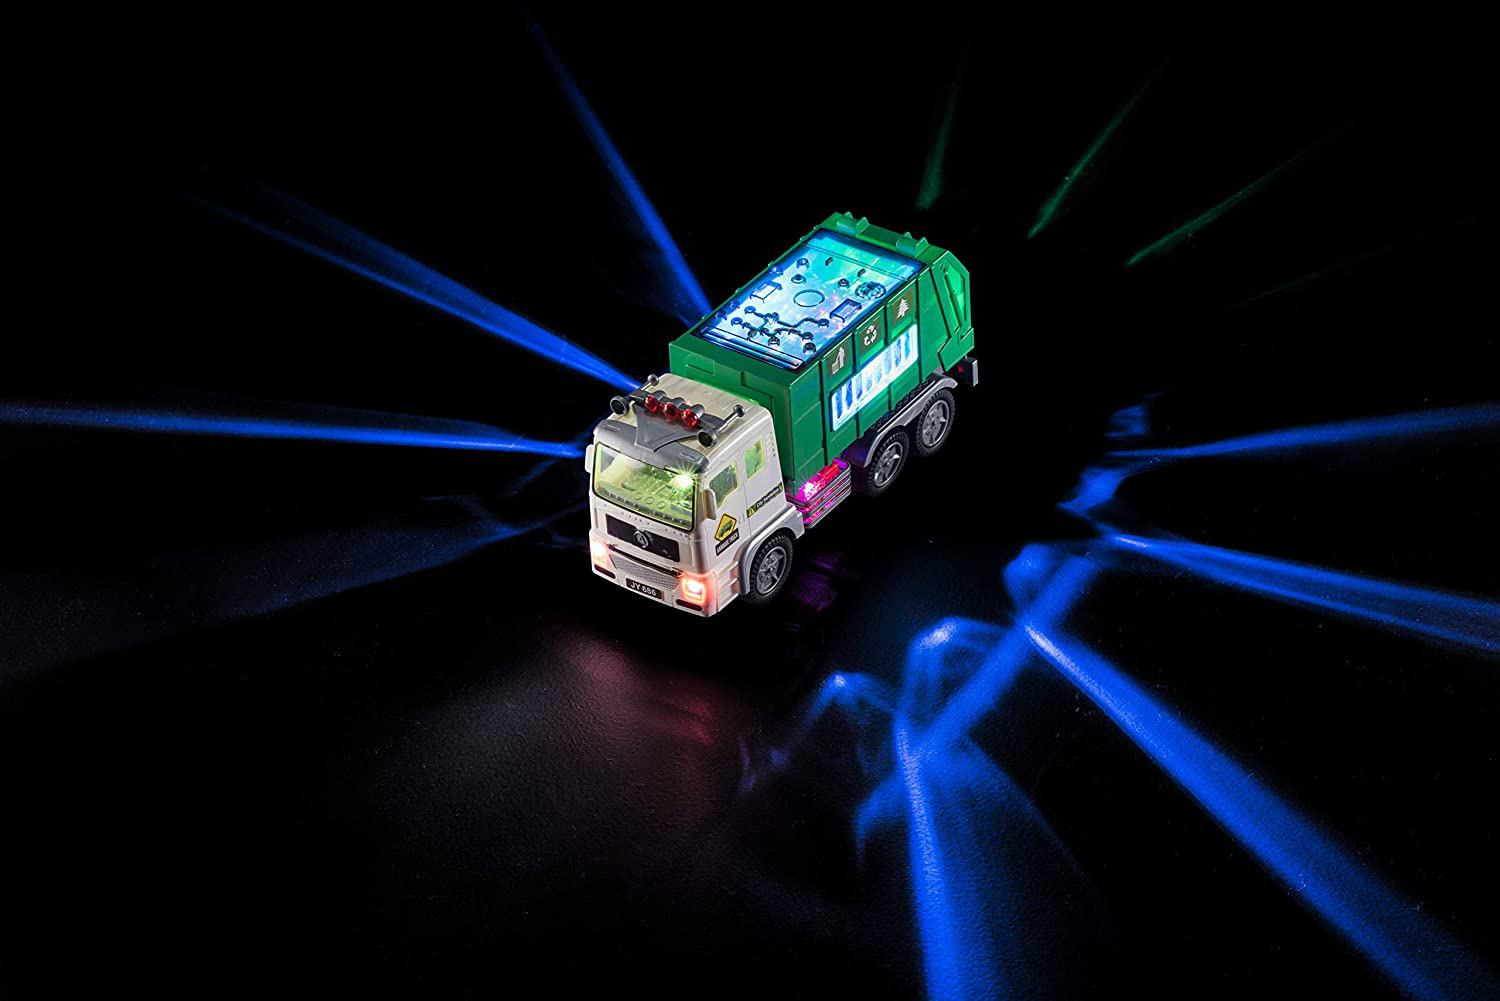 &nbsp; Toy Garbage Truck for Kids with 4D Lights and Sounds - Battery Operated